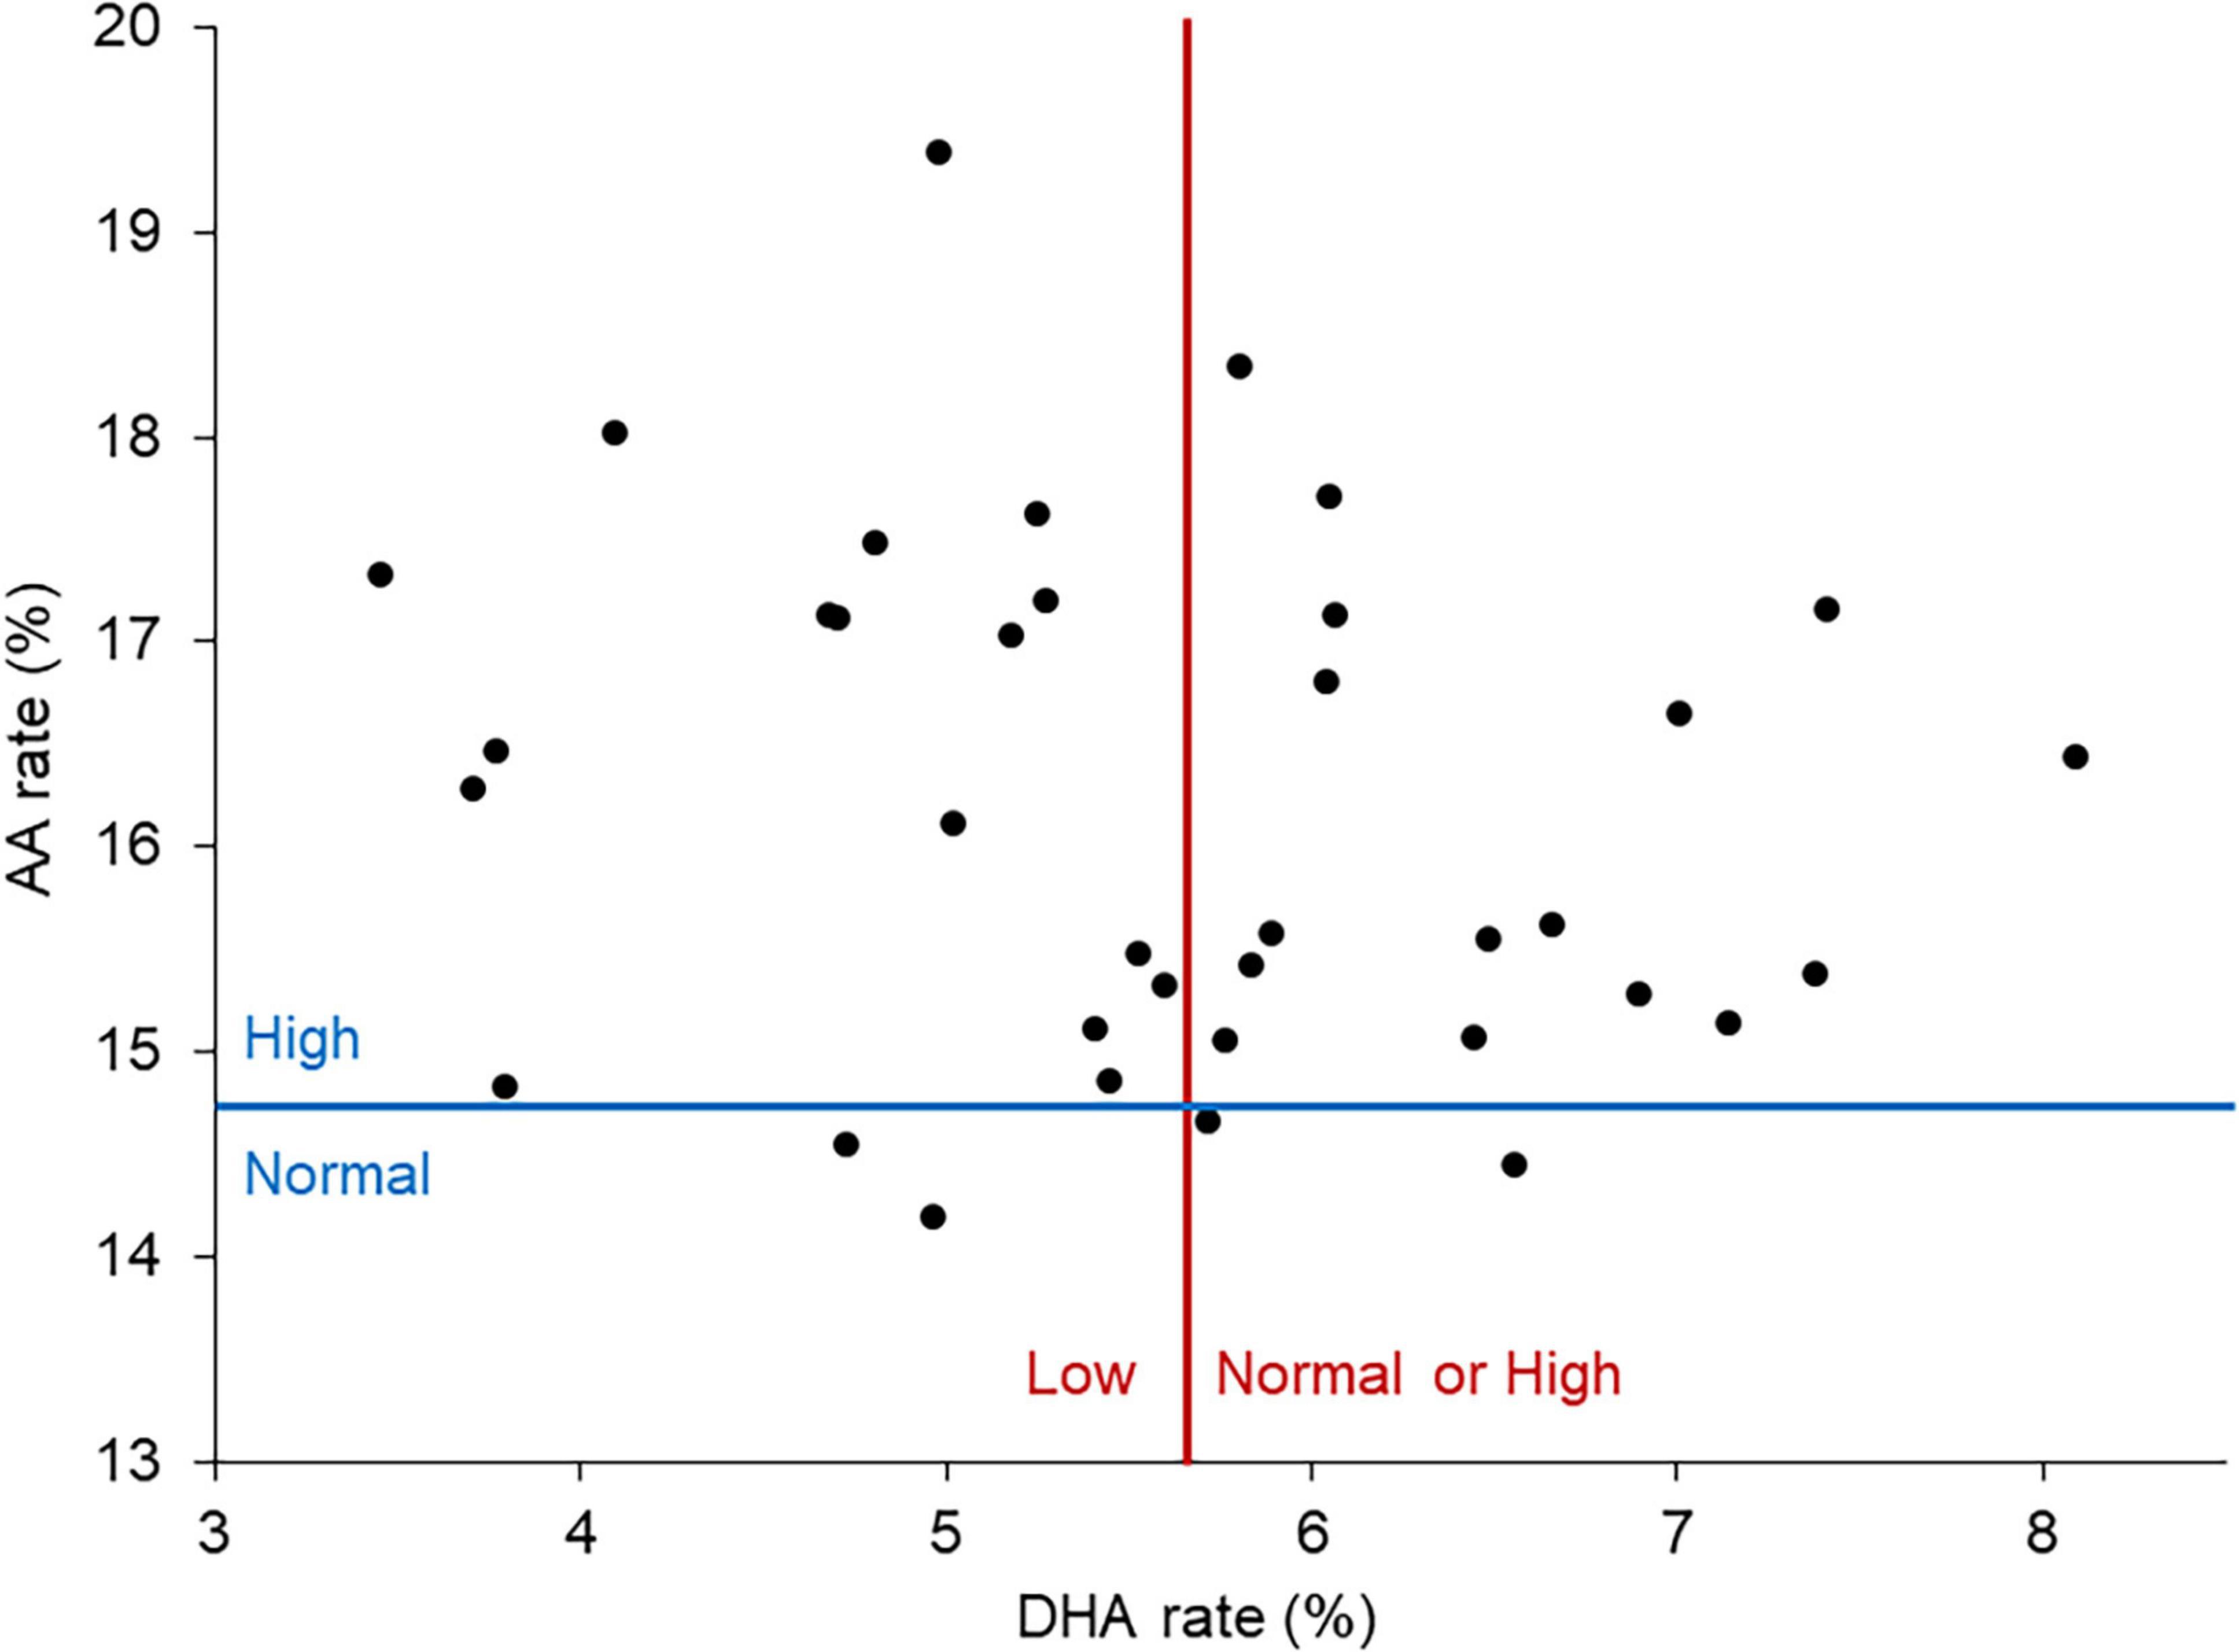 Higher stress response and altered quality of life in schizophrenia patients with low membrane levels of docosahexaenoic acid